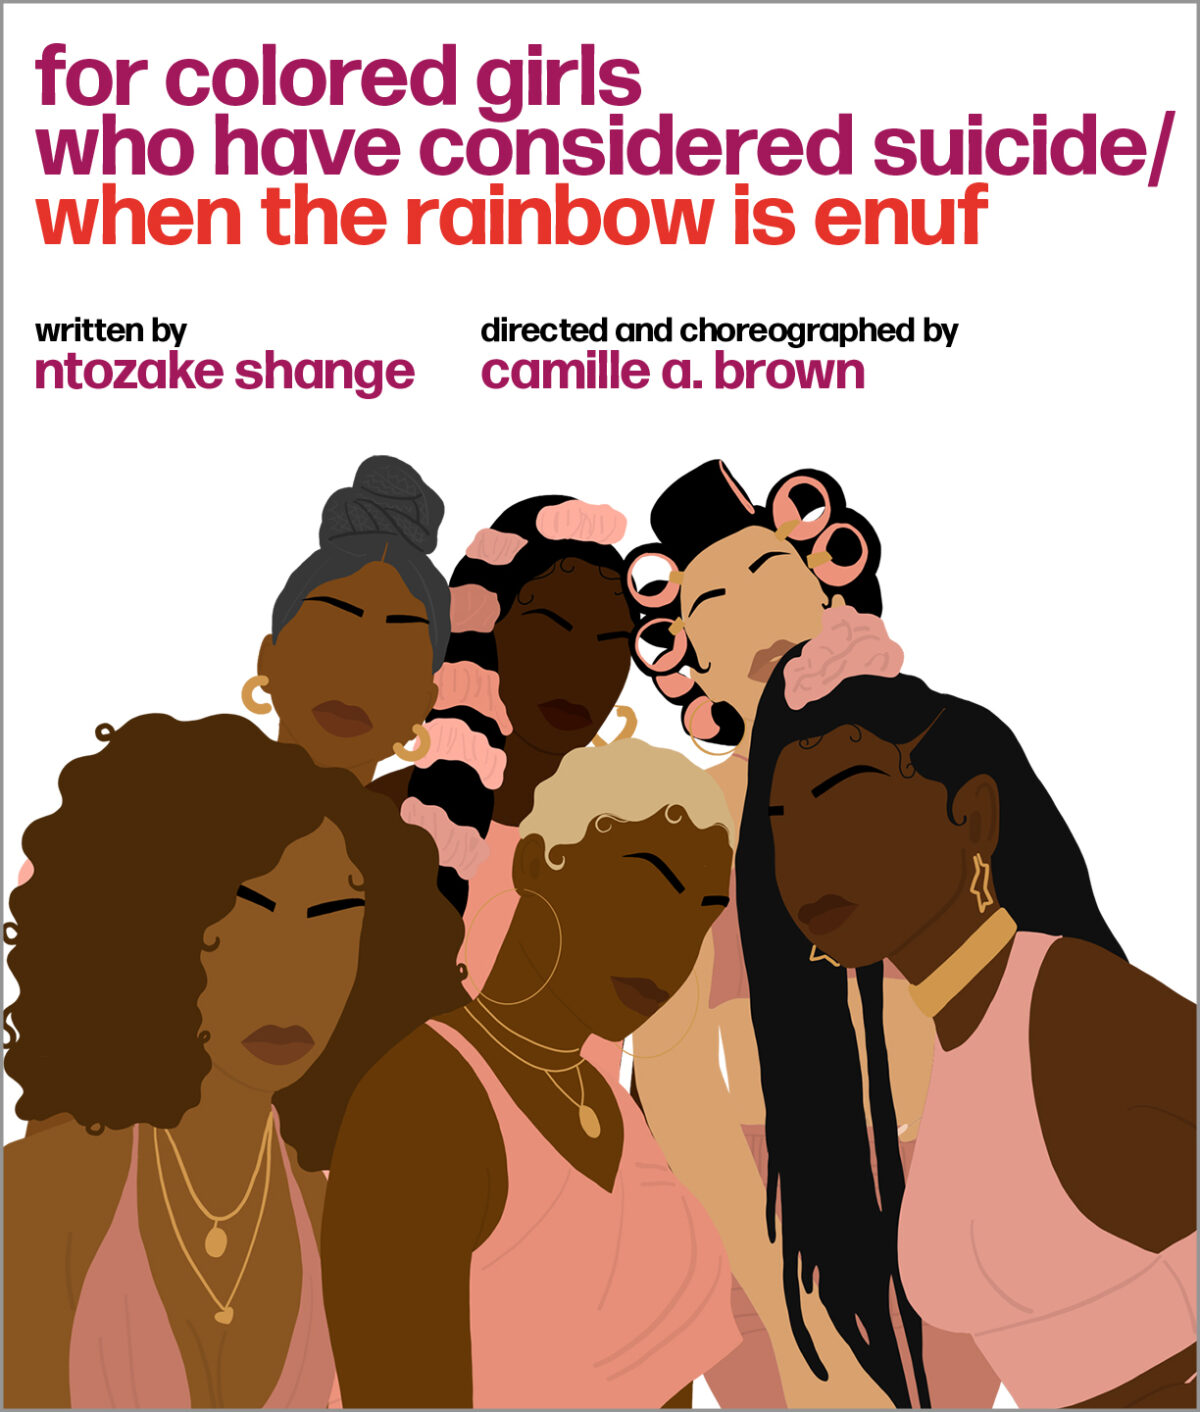 IN APRIL 2022 SCRIBNER WILL REISSUE for colored girls who have considered suicide/ when the rainbow is enuf by Ntozake Shange